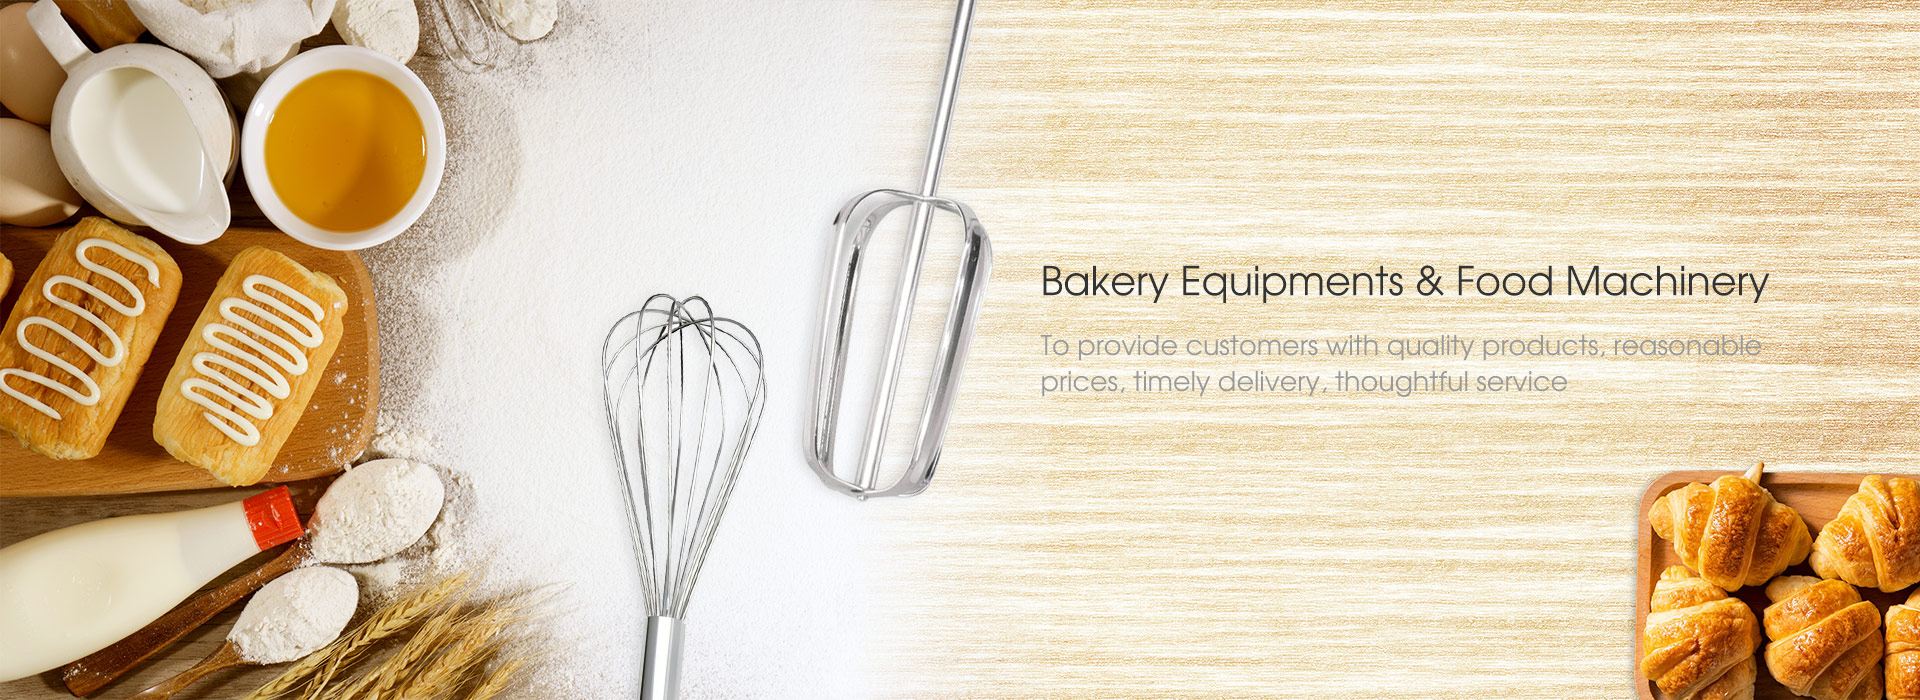 Quality Bakery Equipments and Food Machinery